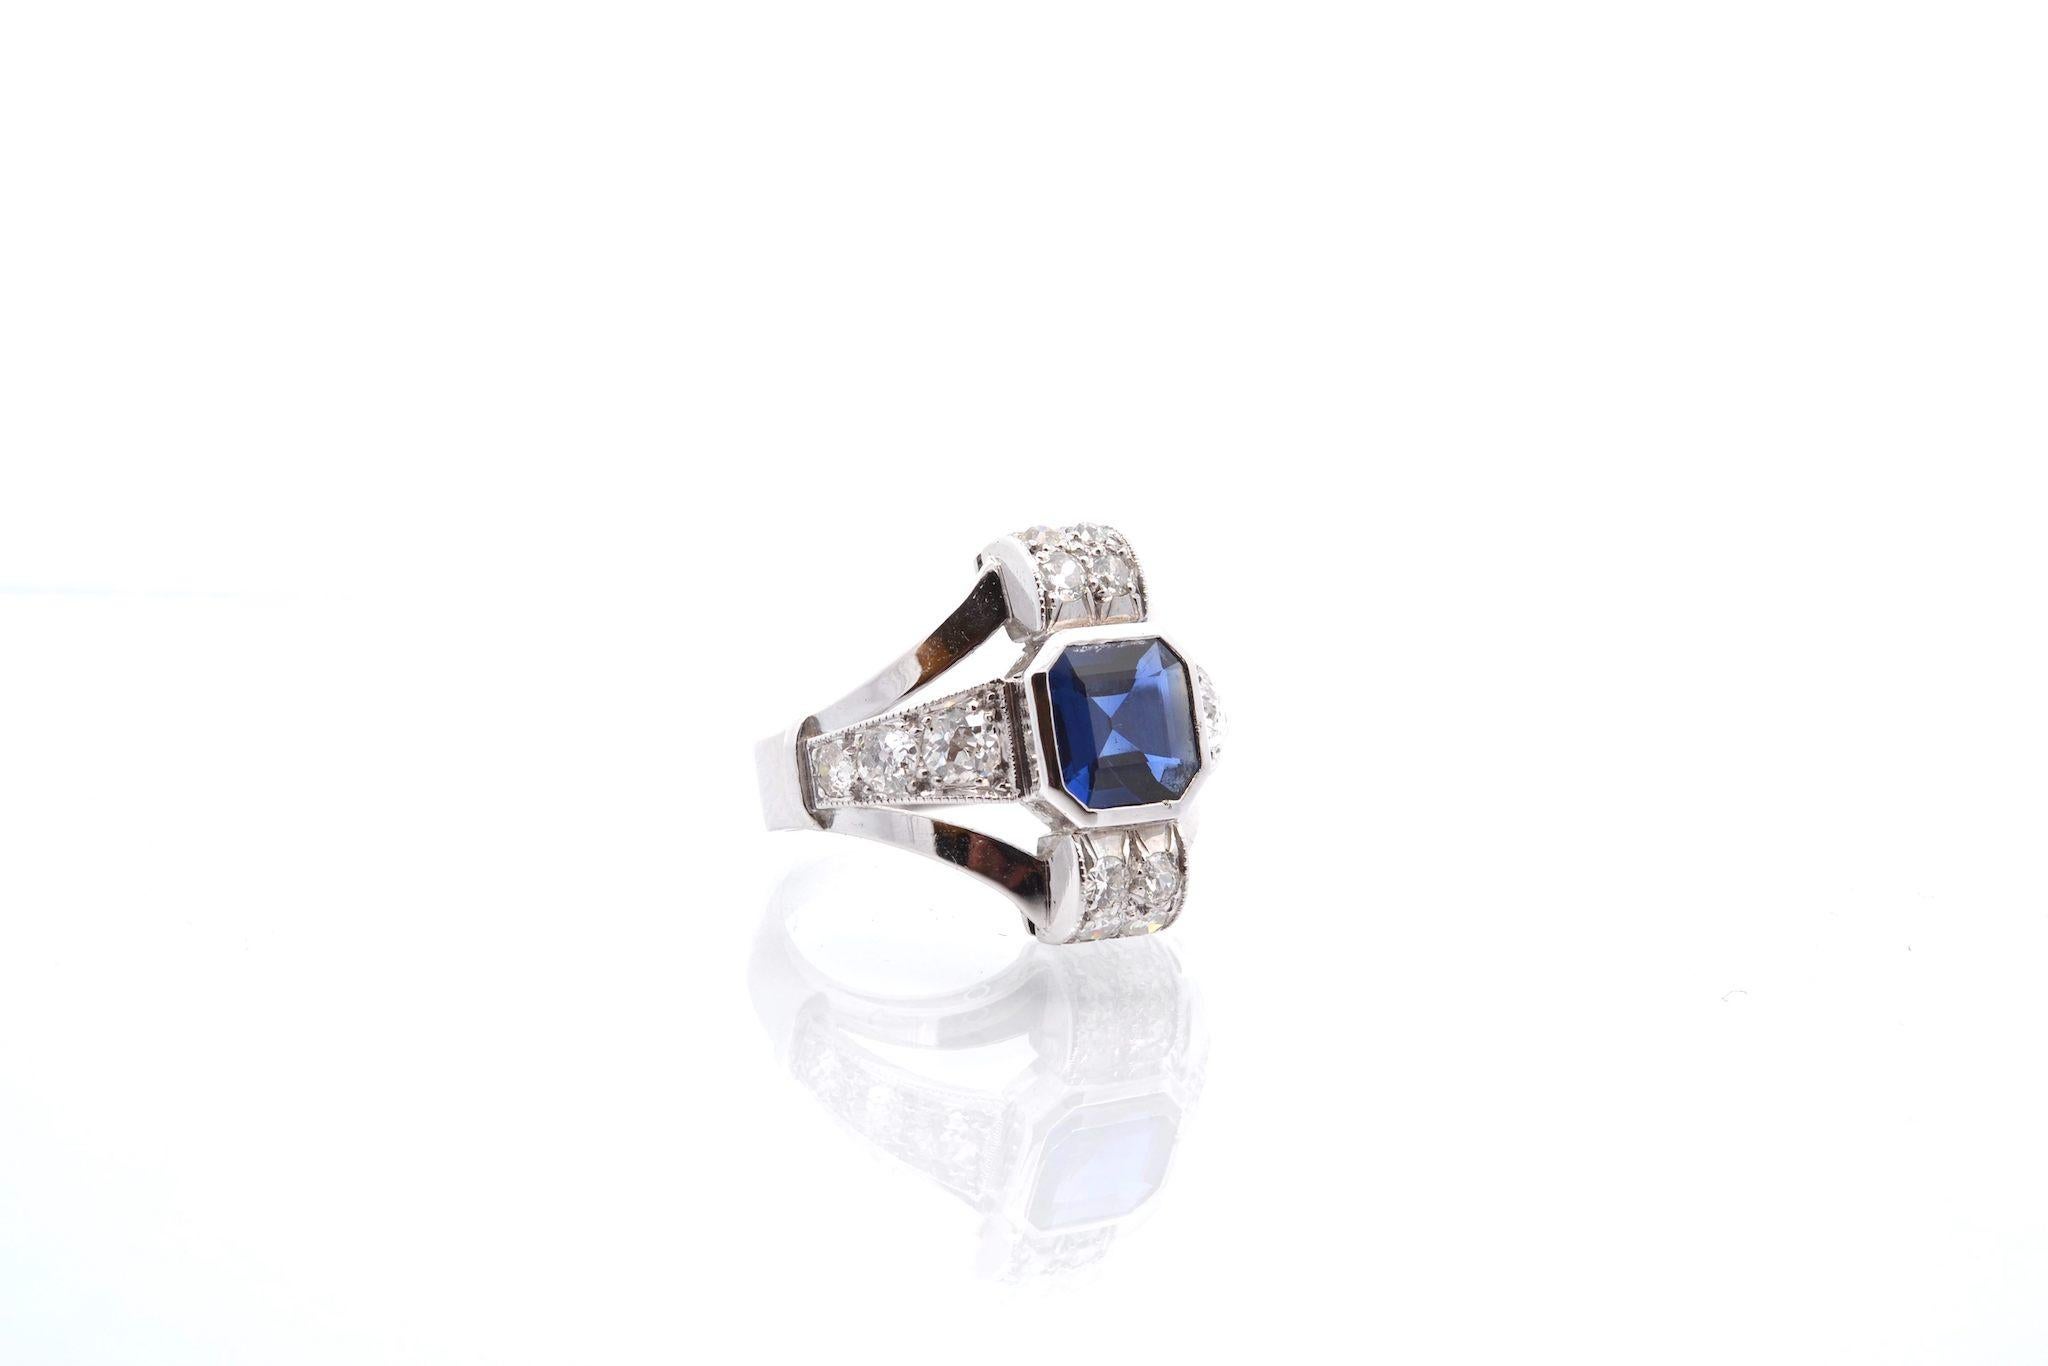 Stones: 1 sapphire: 1.8cts, 14 brilliants: 1.20cts
Material: Platinum
Dimensions: 1.7cm
Weight: 7g
Period: 1930
Size: 52 (free sizing)
Certificate
Ref. : 25373